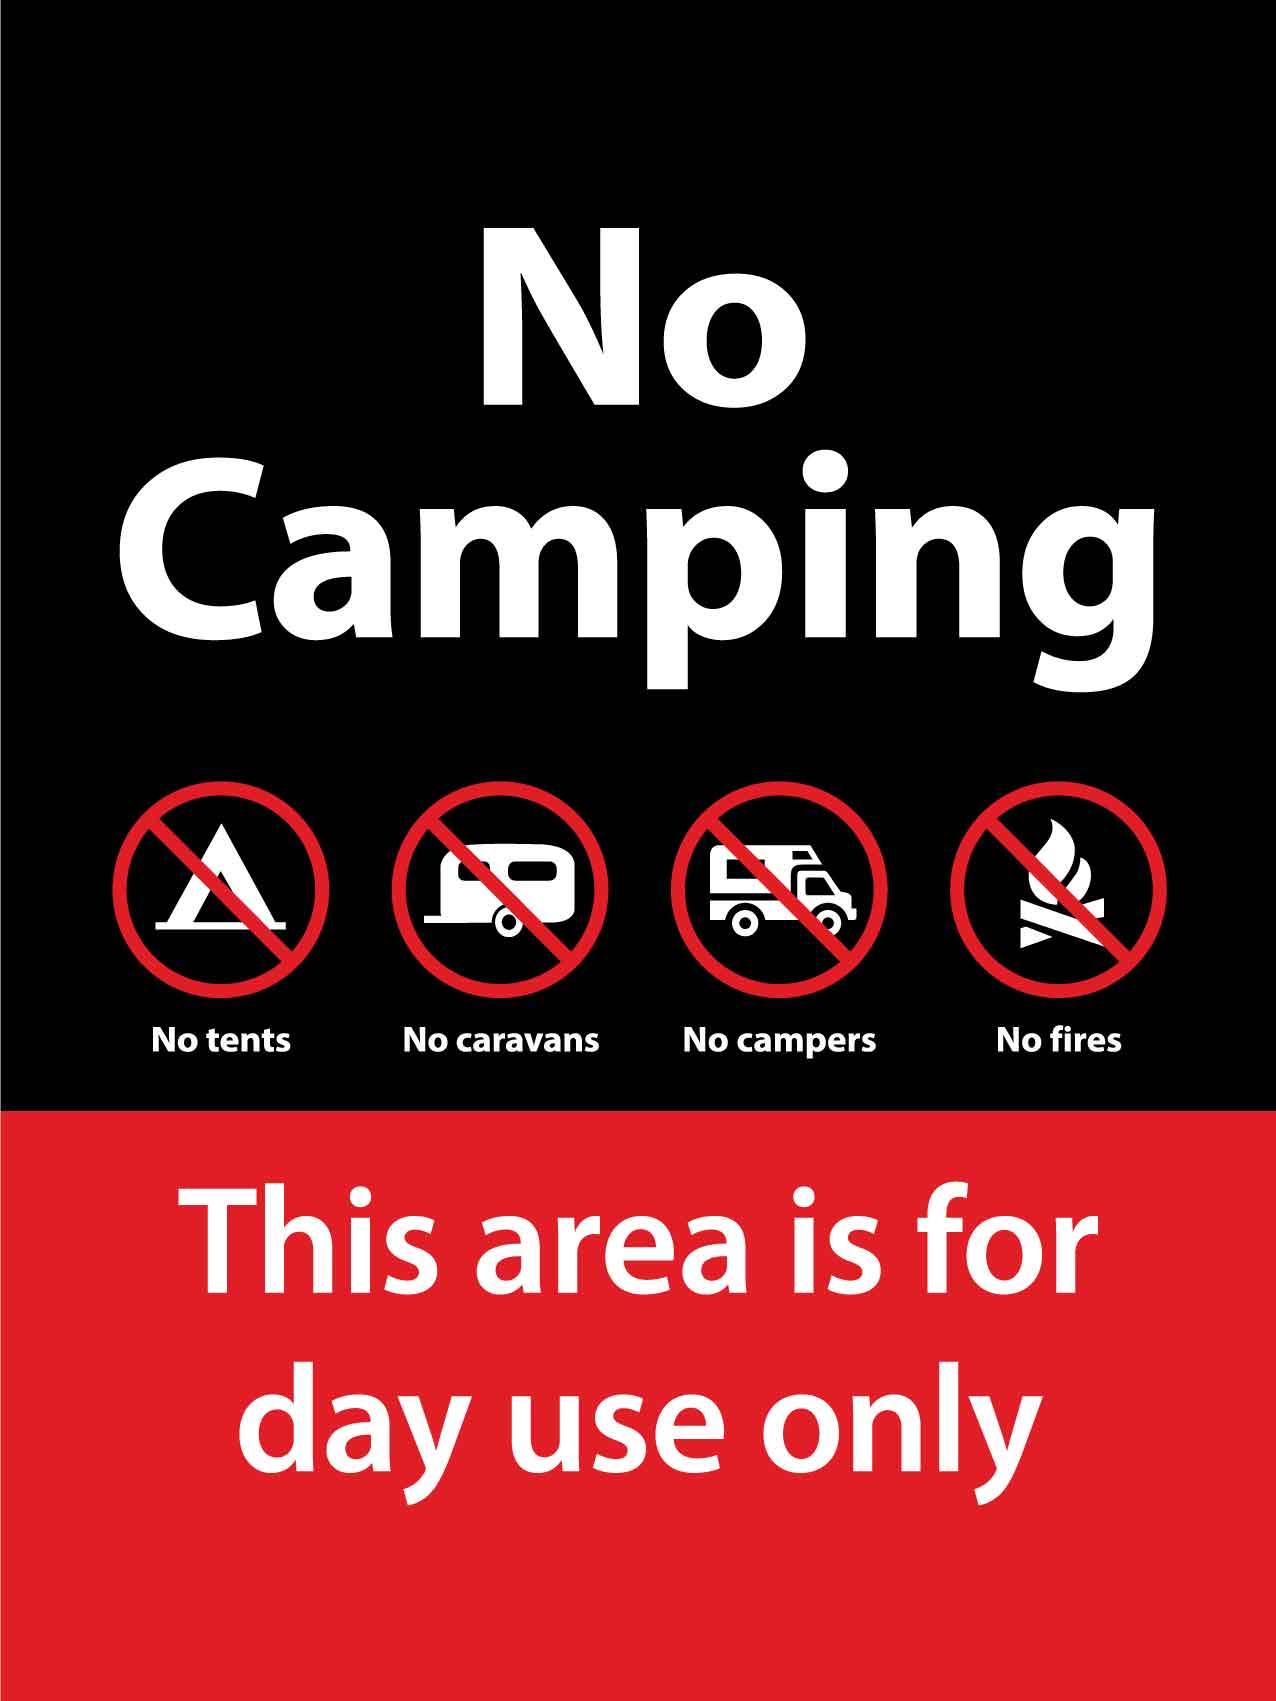 No Camping This Area is For Day Use Only Sign